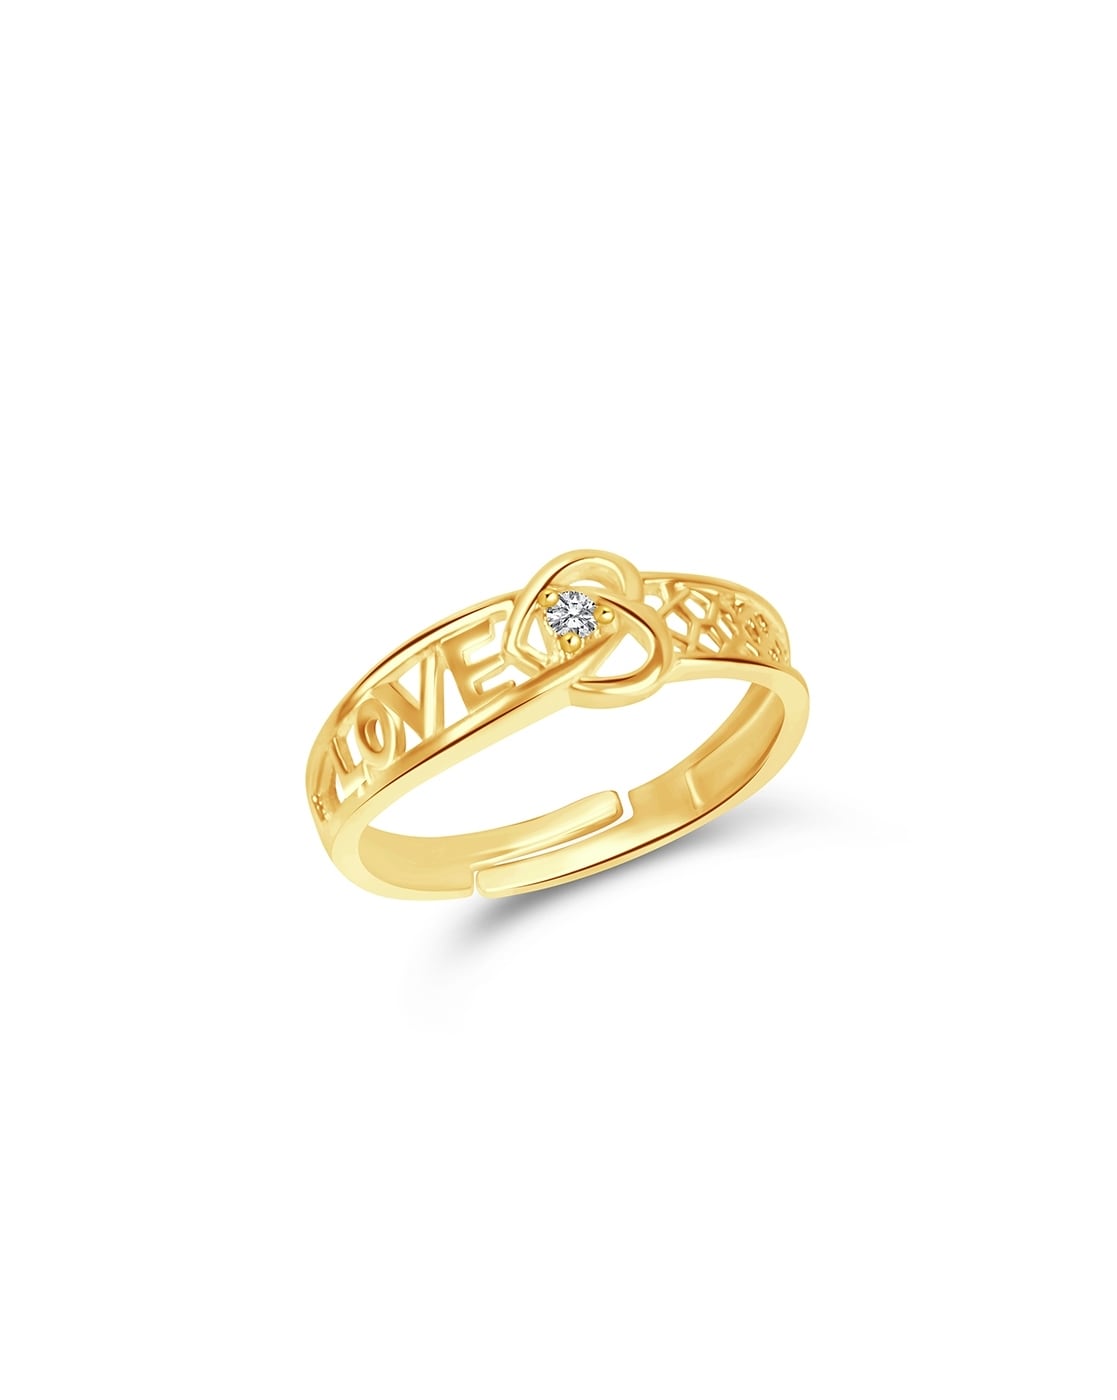 BOVANNI 14K Gold Thin Heart Knot Ring Delicate Love Gold Ring